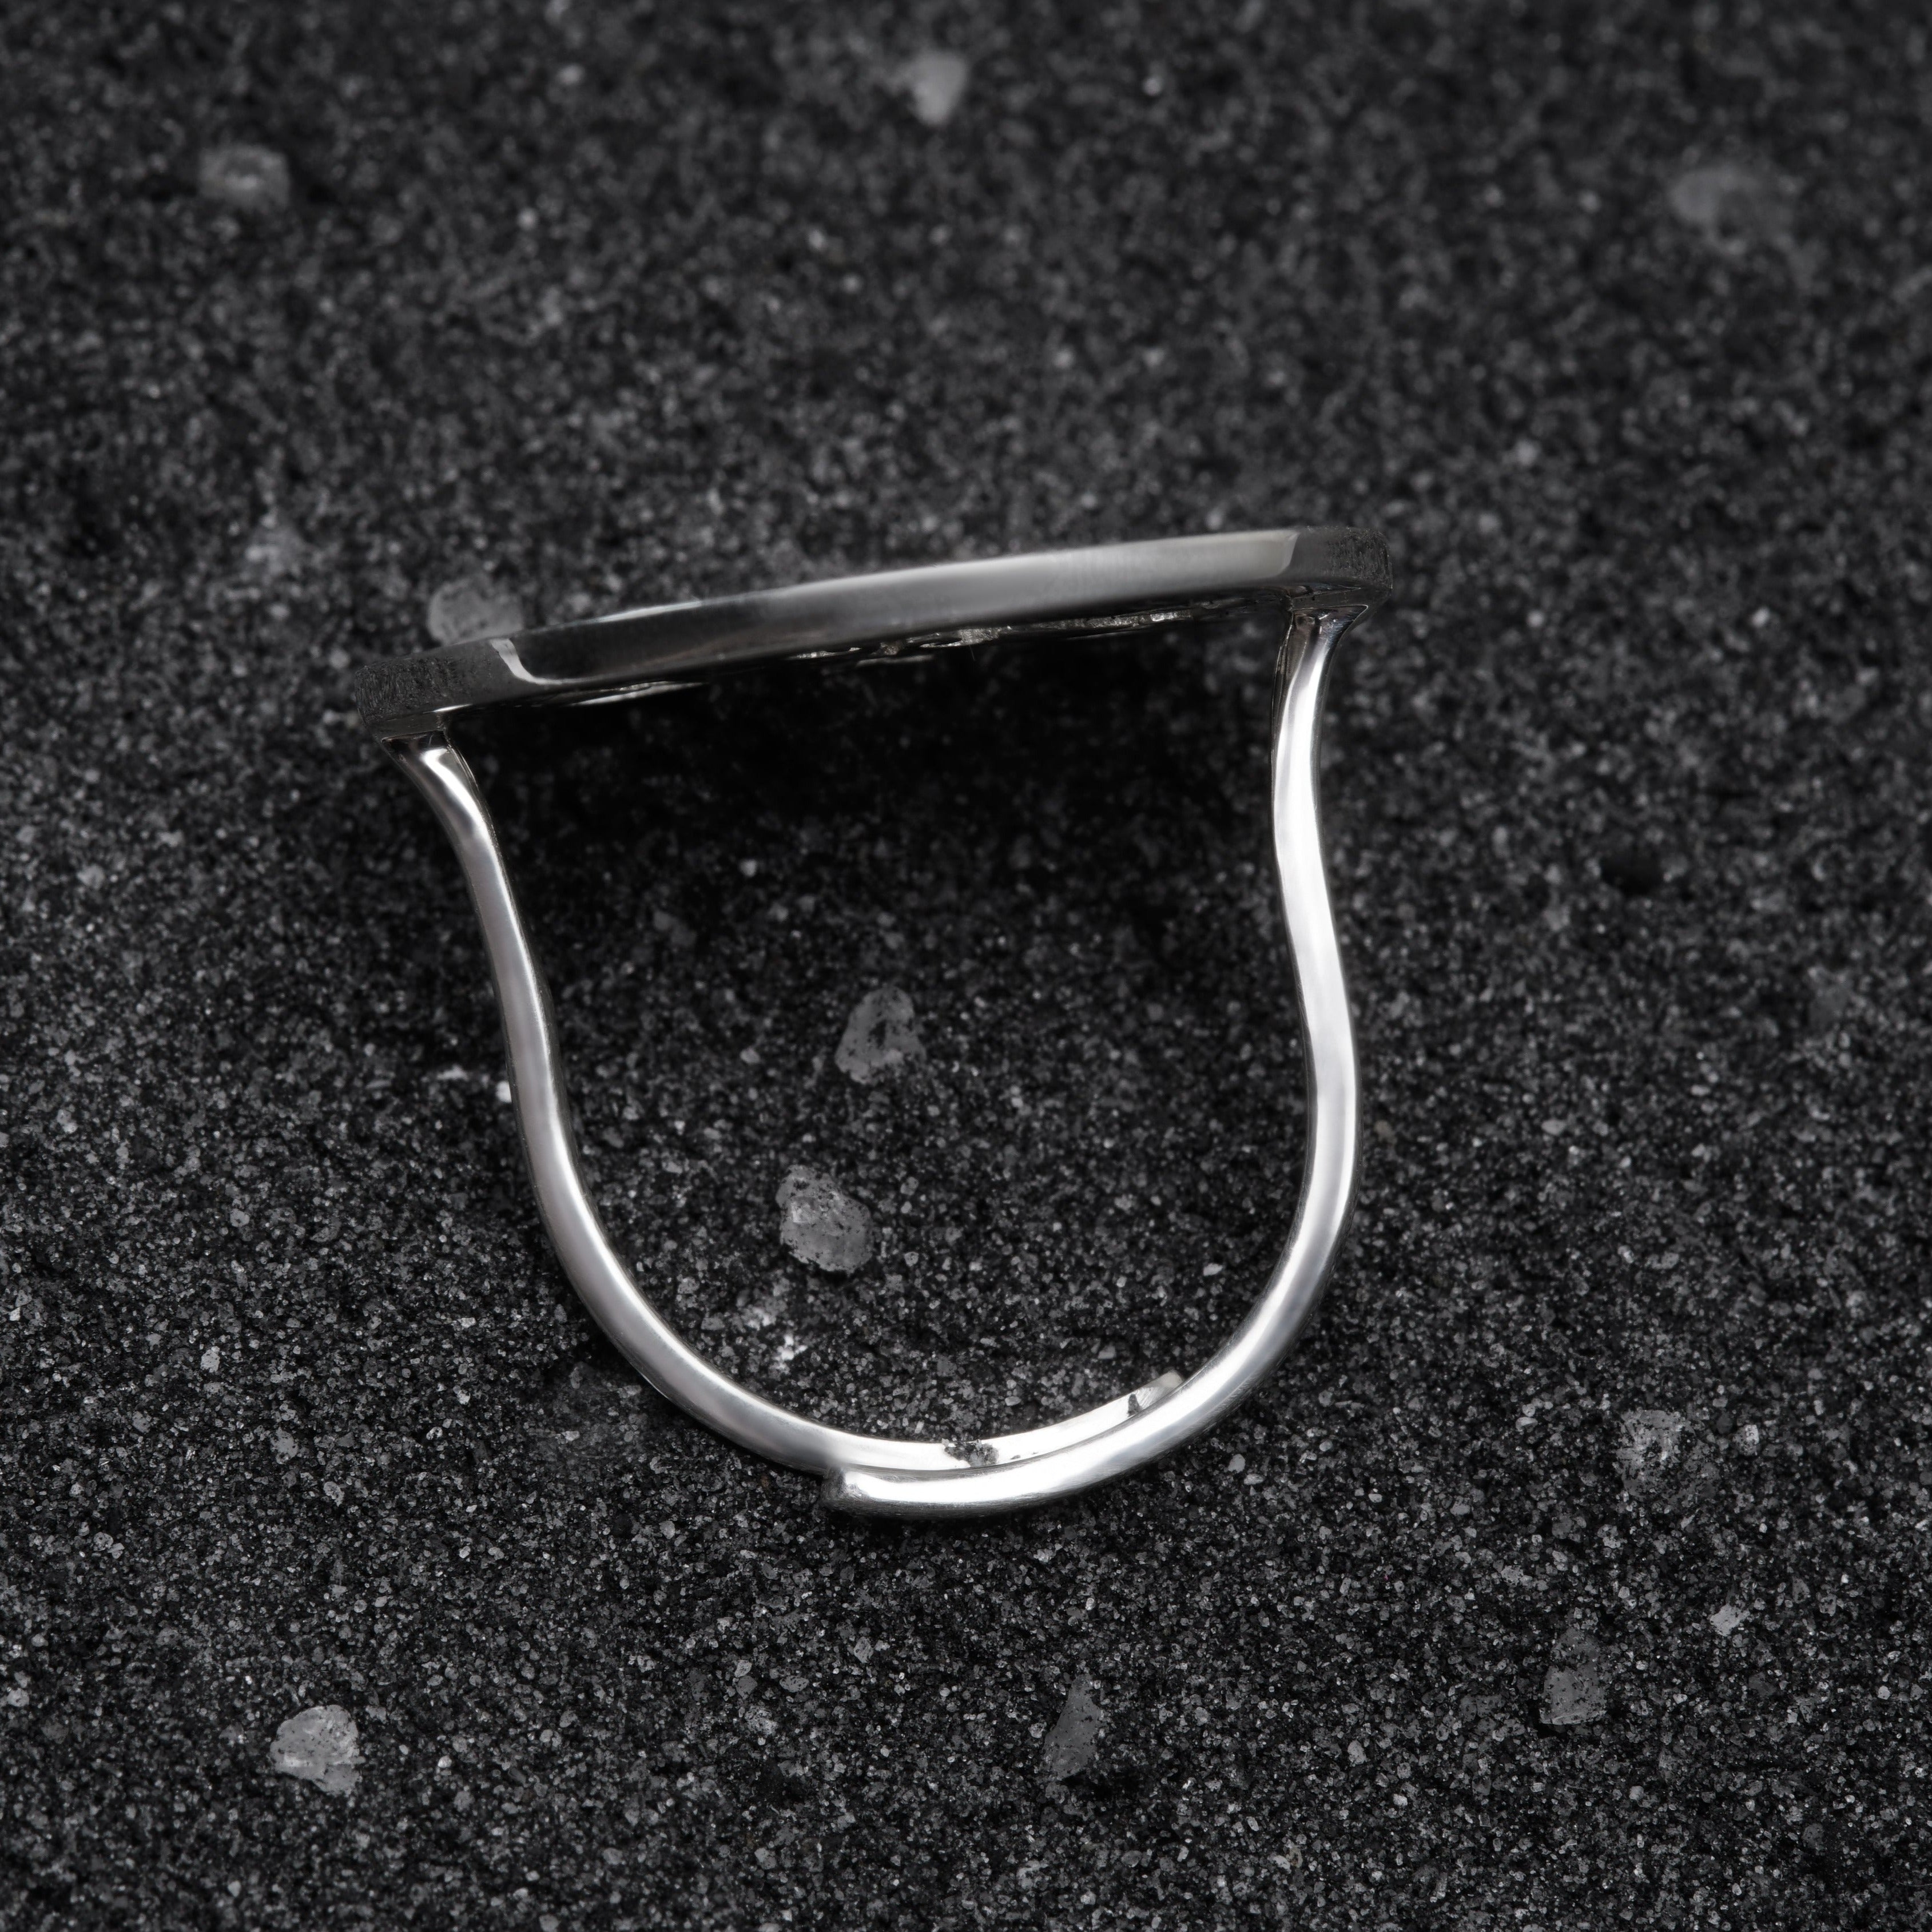 a close up of a metal object on a black surface